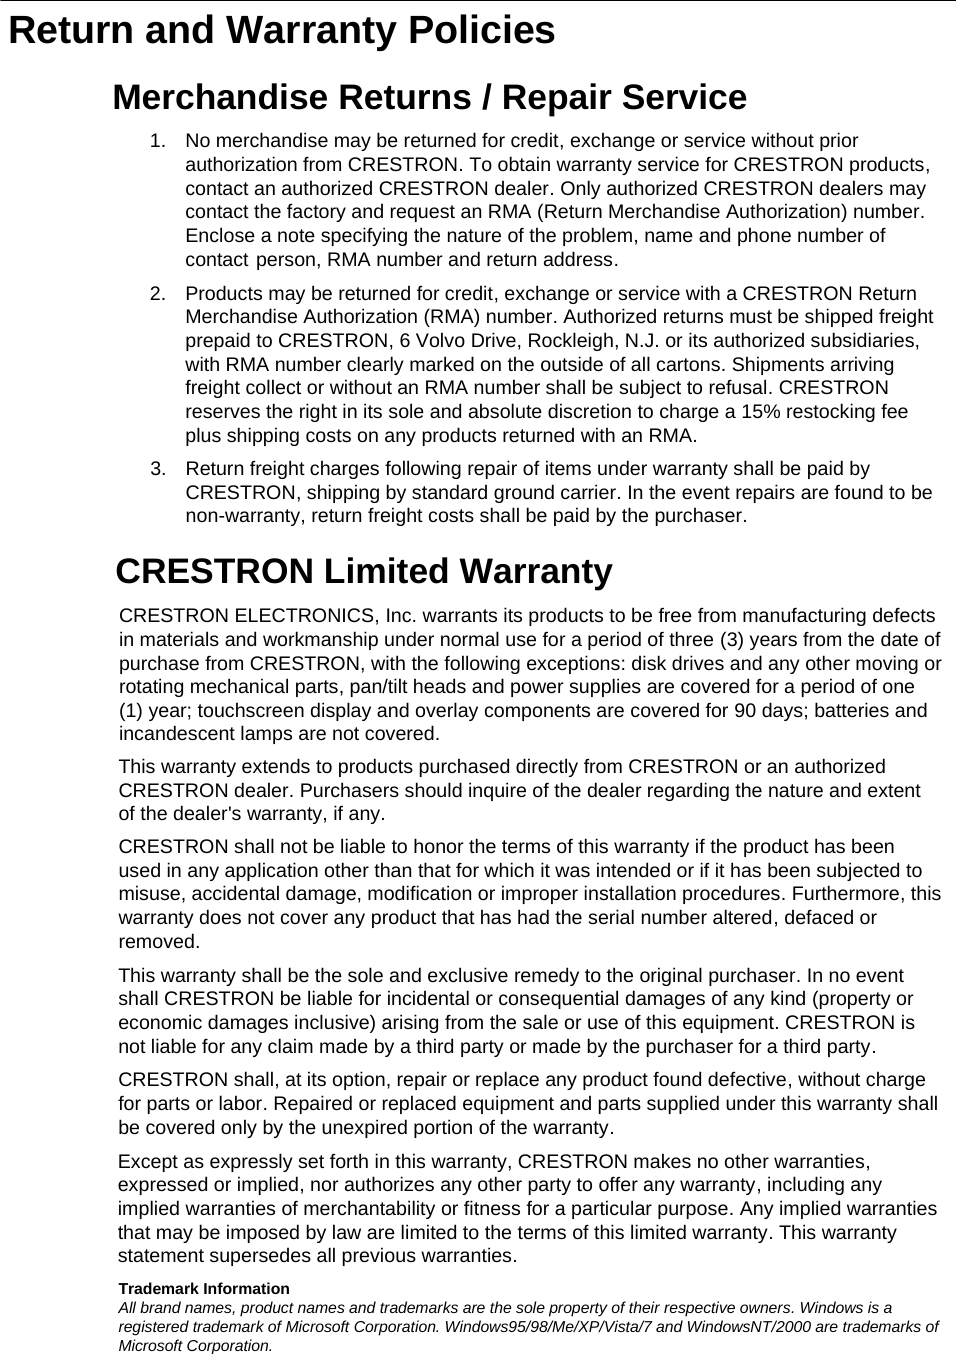   Return and Warranty PoliciesMerchandise Returns / Repair ServiceCRESTRON Limited Warranty1. No merchandise may be returned for credit, exchange or service without prior authorization from CRESTRON. To obtain warranty service for CRESTRON products, contact an authorized CRESTRON dealer. Only authorized CRESTRON dealers may contact the factory and request an RMA (Return Merchandise Authorization) number. Enclose a note specifying the nature of the problem, name and phone number of contact person, RMA number and return address.CRESTRON ELECTRONICS, Inc. warrants its products to be free from manufacturing defects in materials and workmanship under normal use for a period of three (3) years from the date of purchase from CRESTRON, with the following exceptions: disk drives and any other moving or rotating mechanical parts, pan/tilt heads and power supplies are covered for a period of one (1) year; touchscreen display and overlay components are covered for 90 days; batteries and incandescent lamps are not covered. Trademark InformationAll brand names, product names and trademarks are the sole property of their respective owners. Windows is a registered trademark of Microsoft Corporation. Windows95/98/Me/XP/Vista/7 and WindowsNT/2000 are trademarks of Microsoft Corporation.2. Products may be returned for credit, exchange or service with a CRESTRON Return Merchandise Authorization (RMA) number. Authorized returns must be shipped freight prepaid to CRESTRON, 6 Volvo Drive, Rockleigh, N.J. or its authorized subsidiaries, with RMA number clearly marked on the outside of all cartons. Shipments arriving freight collect or without an RMA number shall be subject to refusal. CRESTRON reserves the right in its sole and absolute discretion to charge a 15% restocking fee plus shipping costs on any products returned with an RMA.3. Return freight charges following repair of items under warranty shall be paid by CRESTRON, shipping by standard ground carrier. In the event repairs are found to be non-warranty, return freight costs shall be paid by the purchaser.This warranty extends to products purchased directly from CRESTRON or an authorized CRESTRON dealer. Purchasers should inquire of the dealer regarding the nature and extent of the dealer&apos;s warranty, if any.CRESTRON shall not be liable to honor the terms of this warranty if the product has been used in any application other than that for which it was intended or if it has been subjected to misuse, accidental damage, modification or improper installation procedures. Furthermore, this warranty does not cover any product that has had the serial number altered, defaced or removed.This warranty shall be the sole and exclusive remedy to the original purchaser. In no event shall CRESTRON be liable for incidental or consequential damages of any kind (property or economic damages inclusive) arising from the sale or use of this equipment. CRESTRON is not liable for any claim made by a third party or made by the purchaser for a third party.CRESTRON shall, at its option, repair or replace any product found defective, without charge for parts or labor. Repaired or replaced equipment and parts supplied under this warranty shall be covered only by the unexpired portion of the warranty.Except as expressly set forth in this warranty, CRESTRON makes no other warranties, expressed or implied, nor authorizes any other party to offer any warranty, including any implied warranties of merchantability or fitness for a particular purpose. Any implied warranties that may be imposed by law are limited to the terms of this limited warranty. This warranty statement supersedes all previous warranties. 